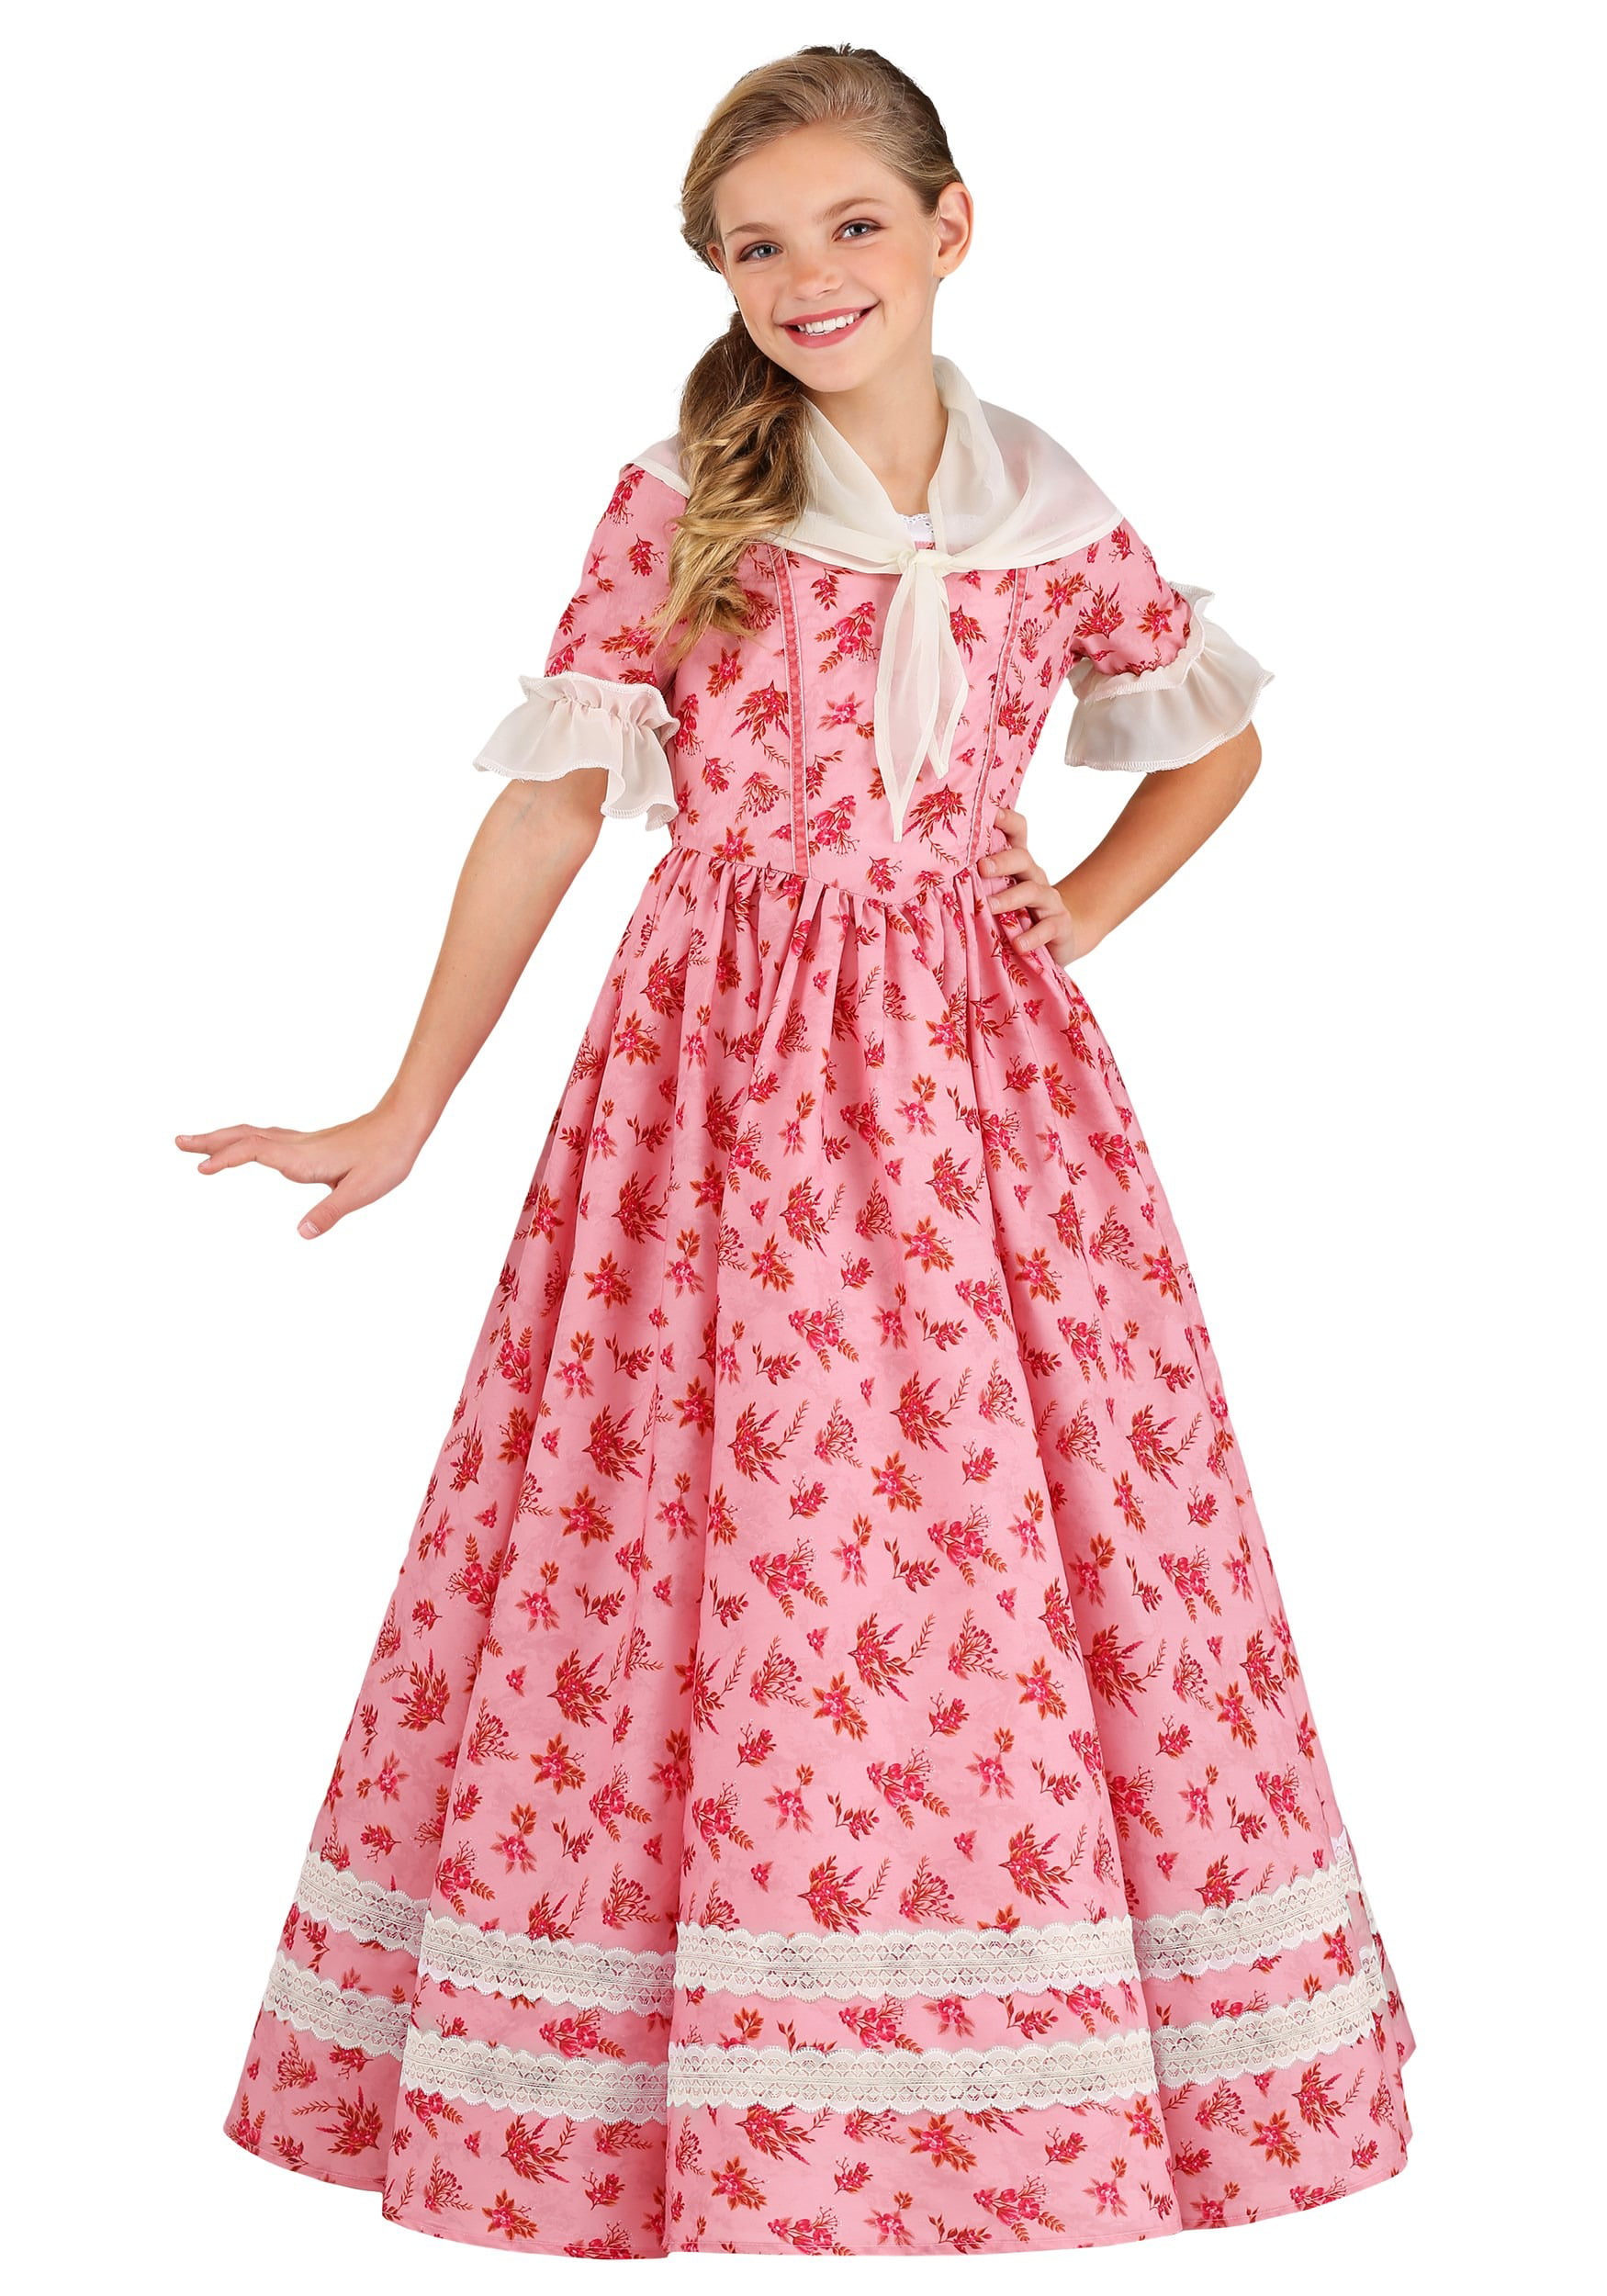 Lovely Southern Belle Costume | lupon.gov.ph